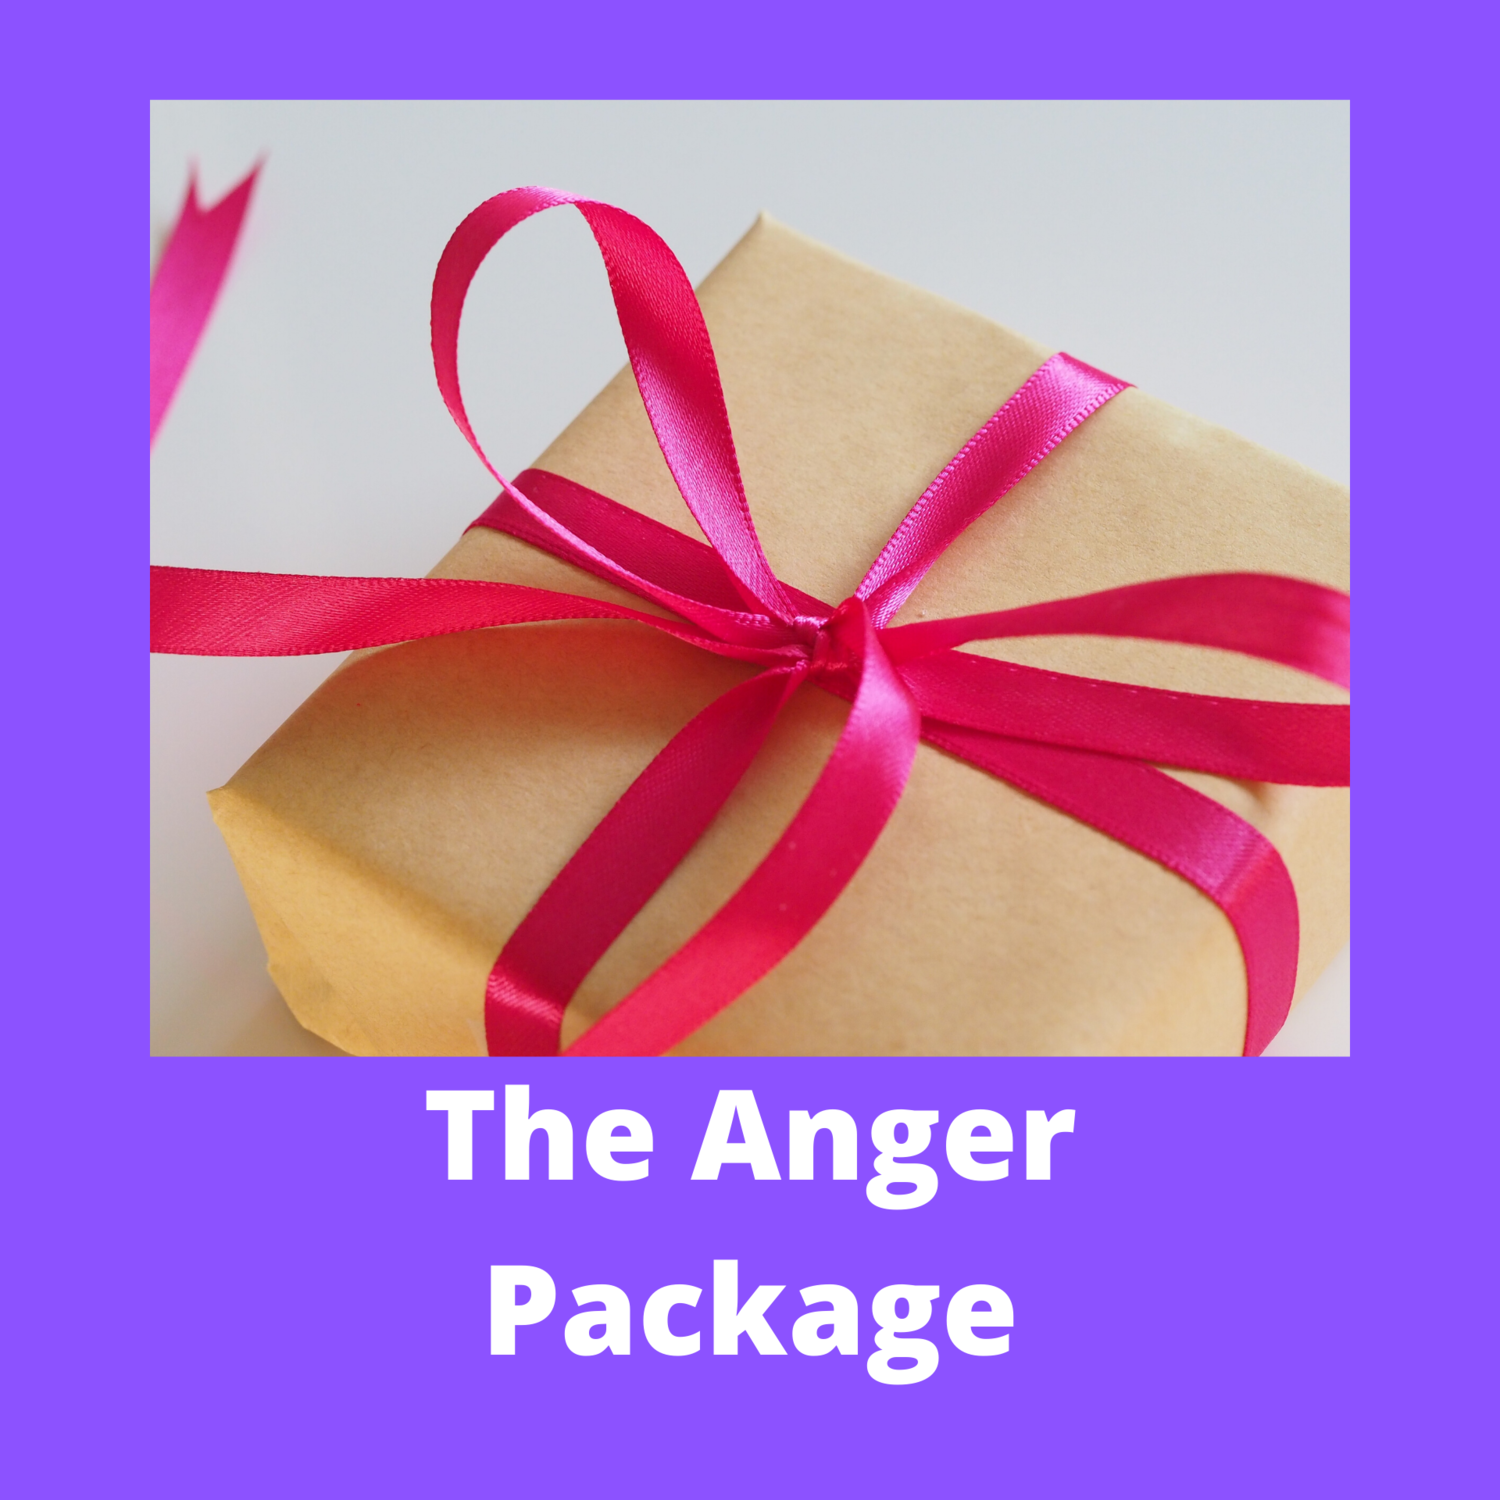 The Anger Package